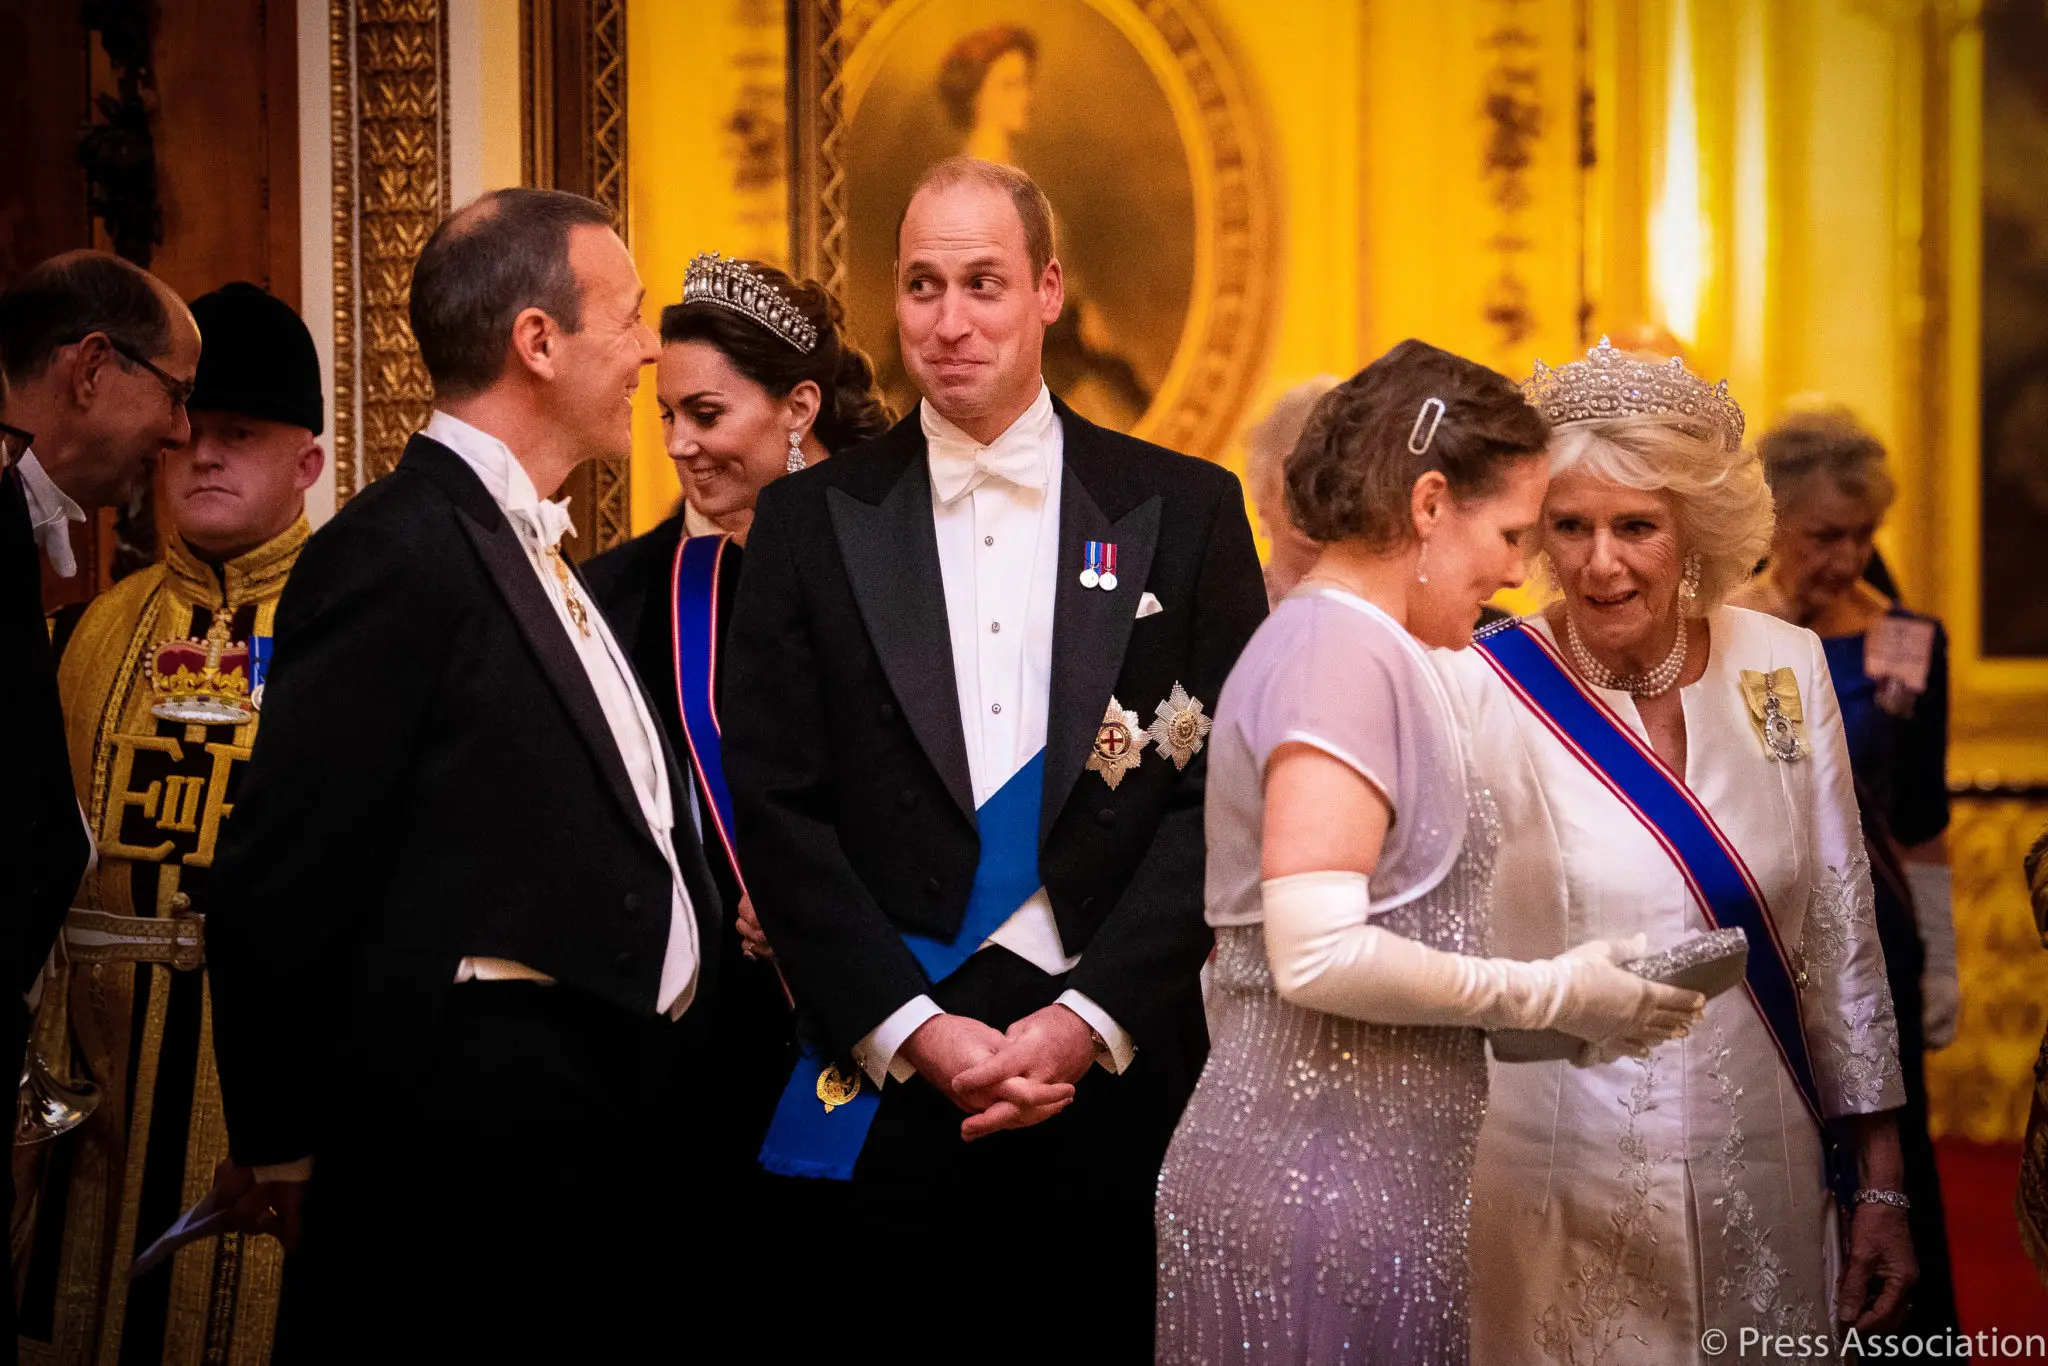 The Duke and Duchess of Cambridge attended the annual Diplomatic reception in December 2019